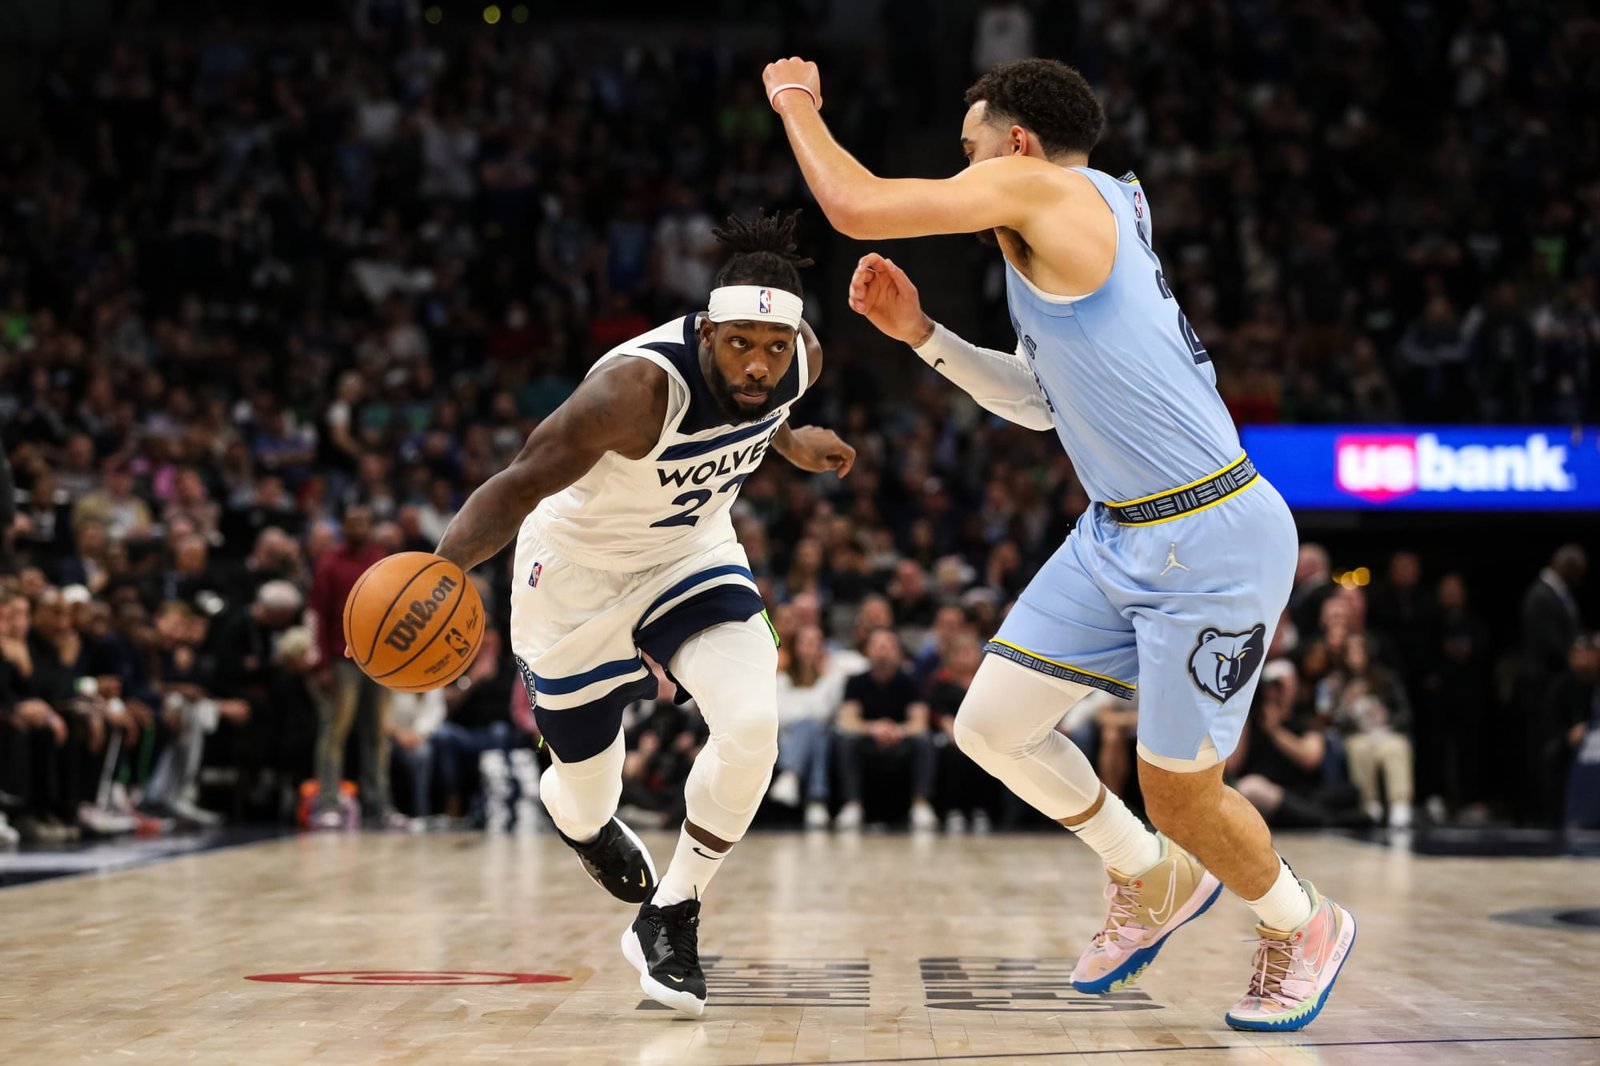 Grizzlies, Timberwolves can’t play basketball without protestors stopping games